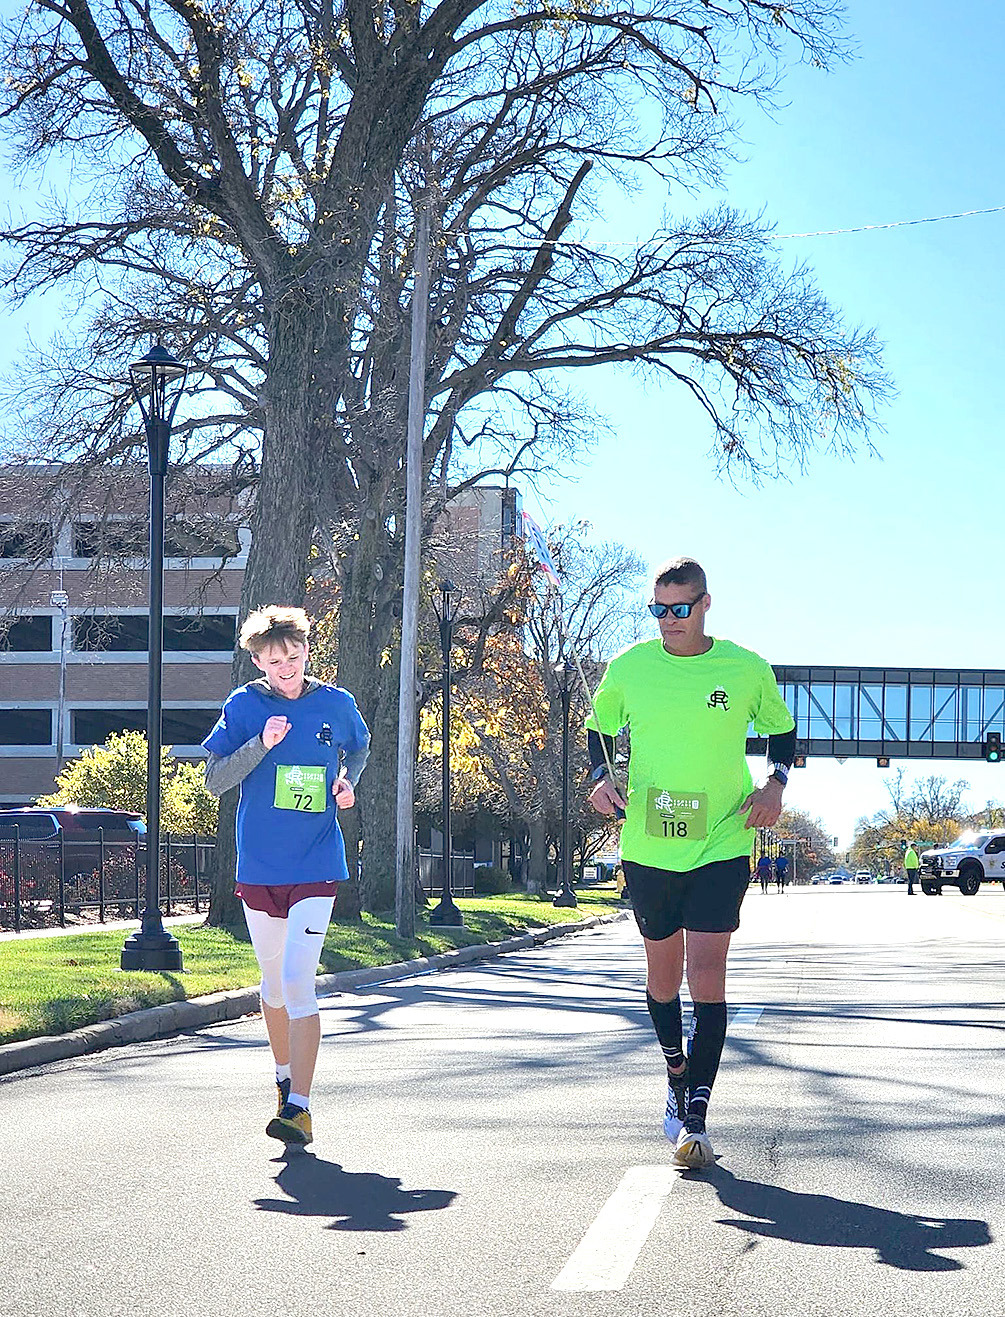 CAMERON LINDSEY, left, keeps stride during the marathon race with the help from pacer Scott Binkley, right. Submitted Photo